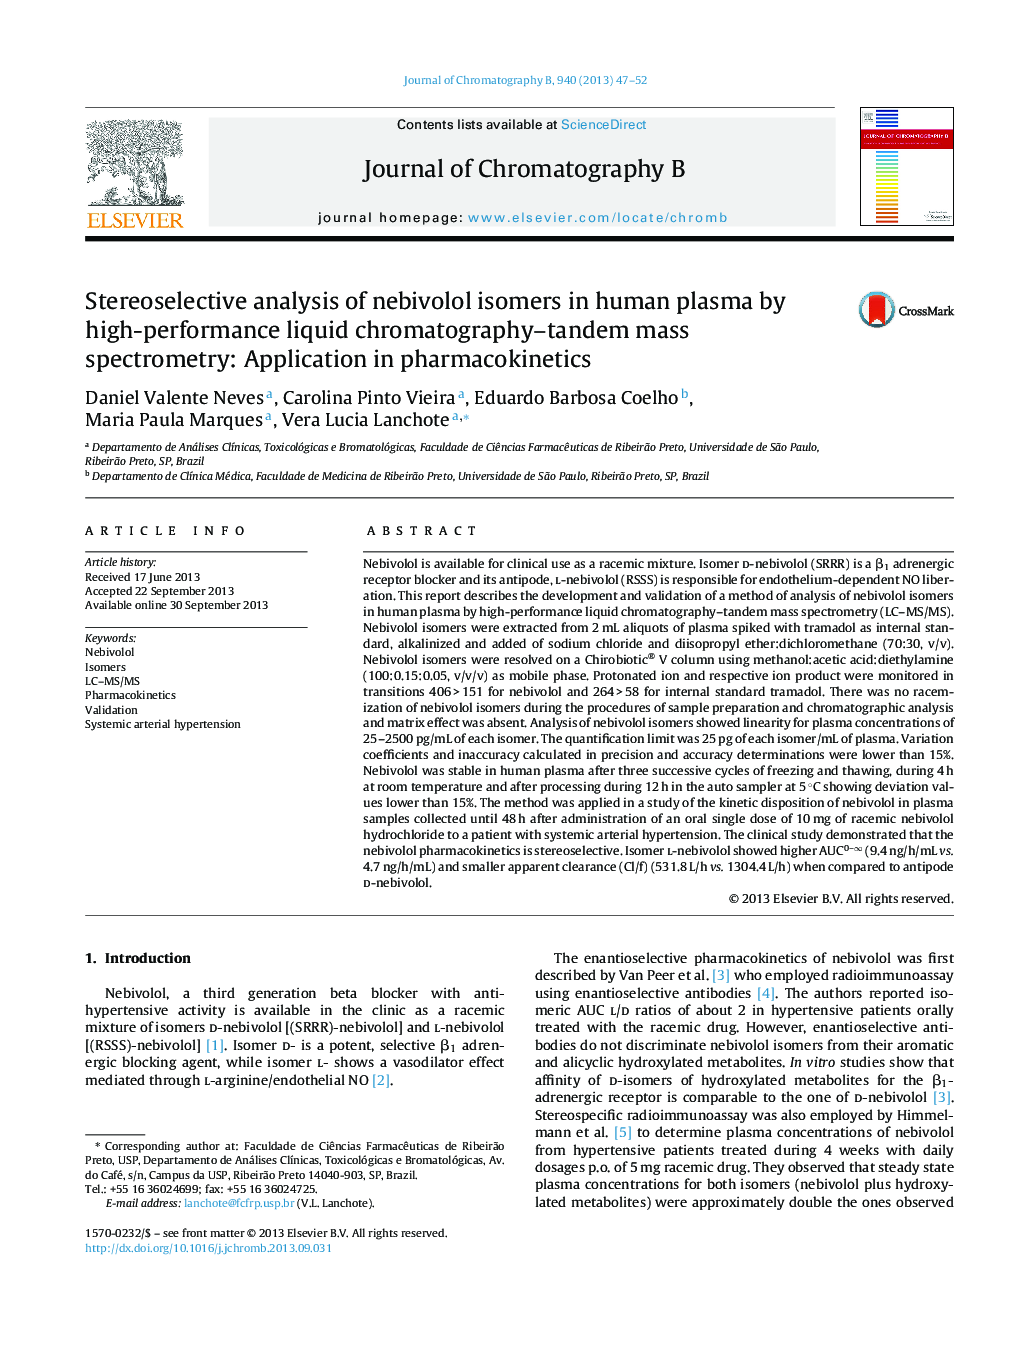 Stereoselective analysis of nebivolol isomers in human plasma by high-performance liquid chromatography–tandem mass spectrometry: Application in pharmacokinetics